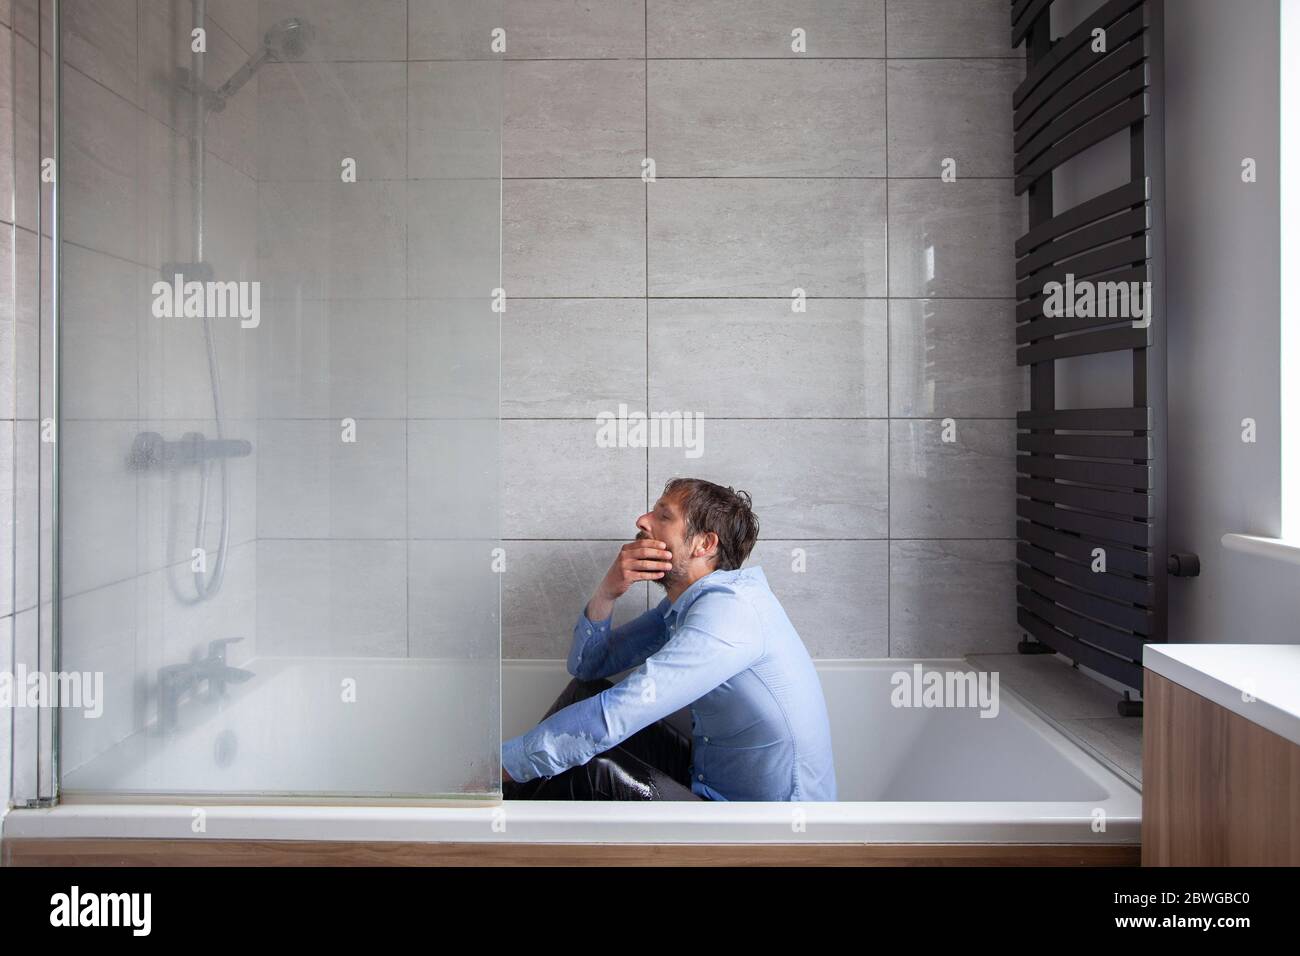 Man suffering with depression Stock Photo